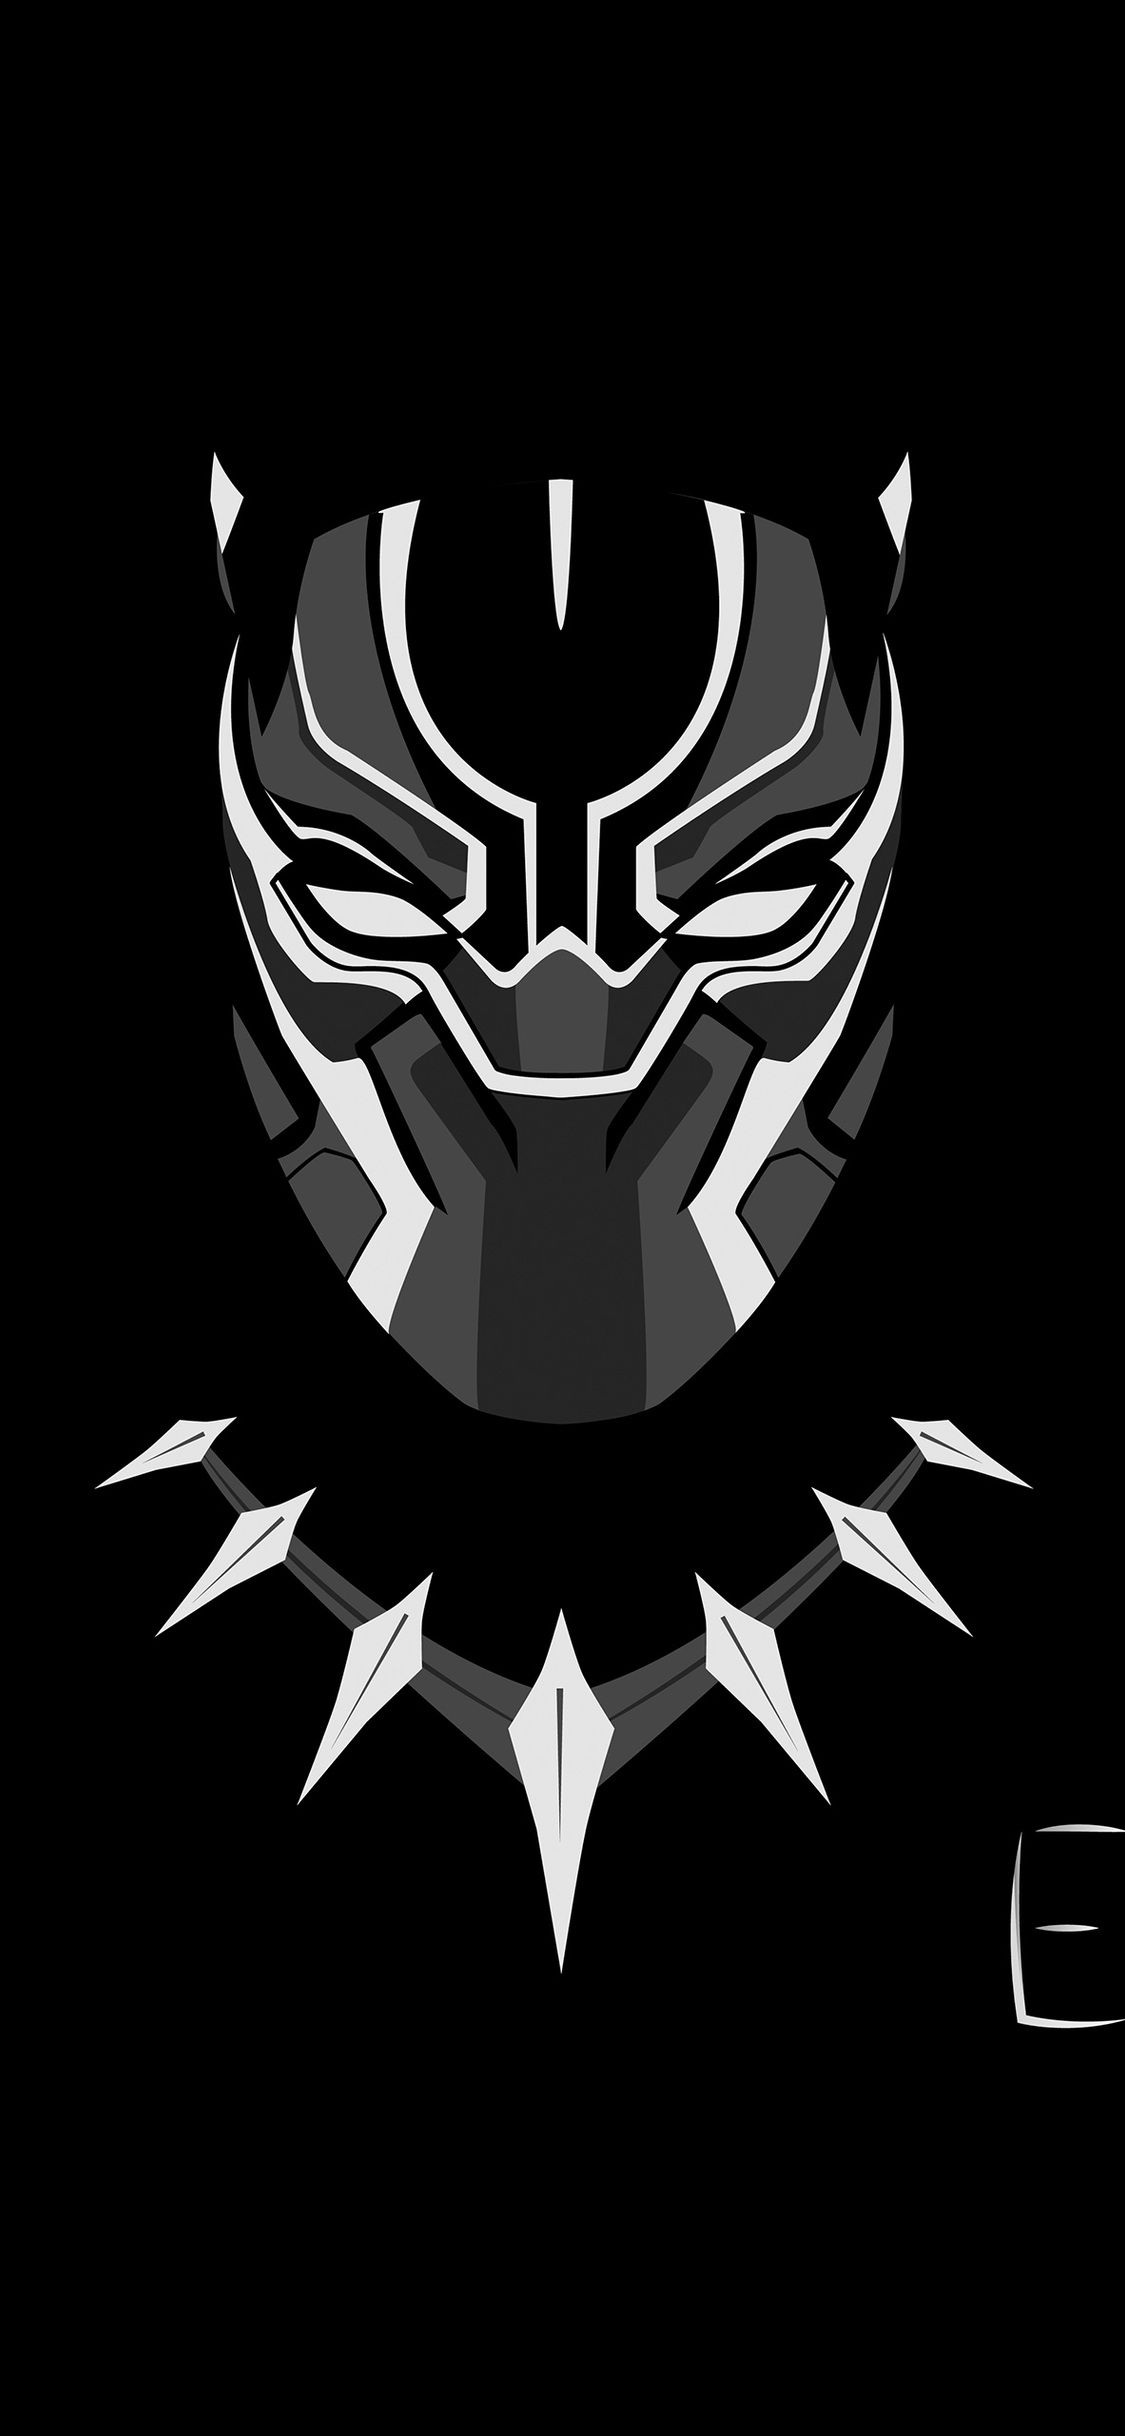 1125x2436 Black Panther Minimalism 4k Iphone XS,Iphone 10,Iphone X HD 4k Wallpapers, Image, Backgrounds, Photos and Pictures